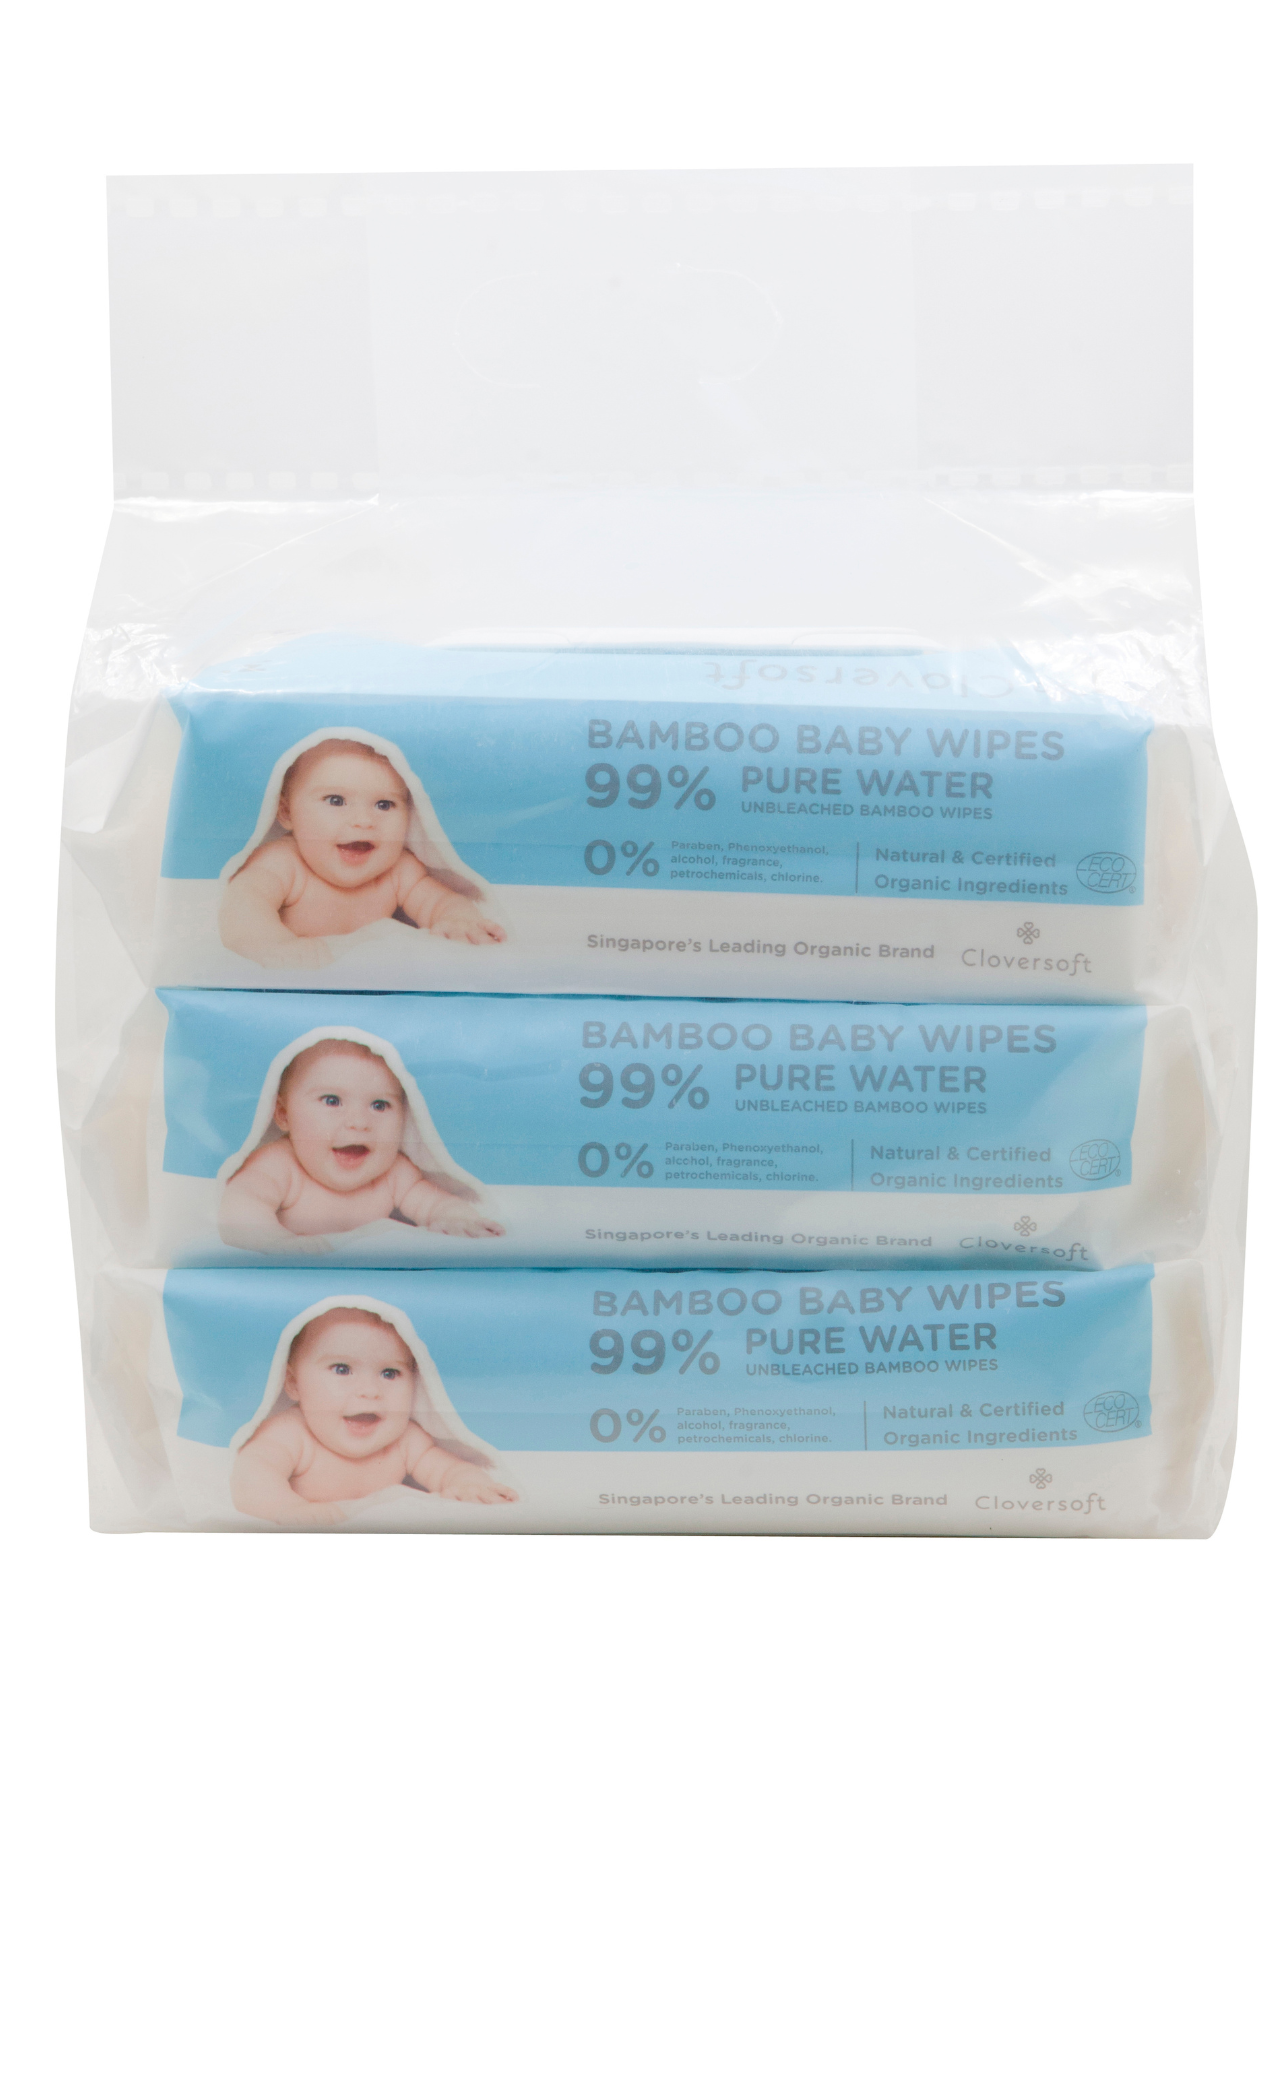 Cloversoft Baby Wipes (Unbleached Bamboo Pure Water Organic Baby Wipes 3 X 70 Sheets) - Bundle of 2